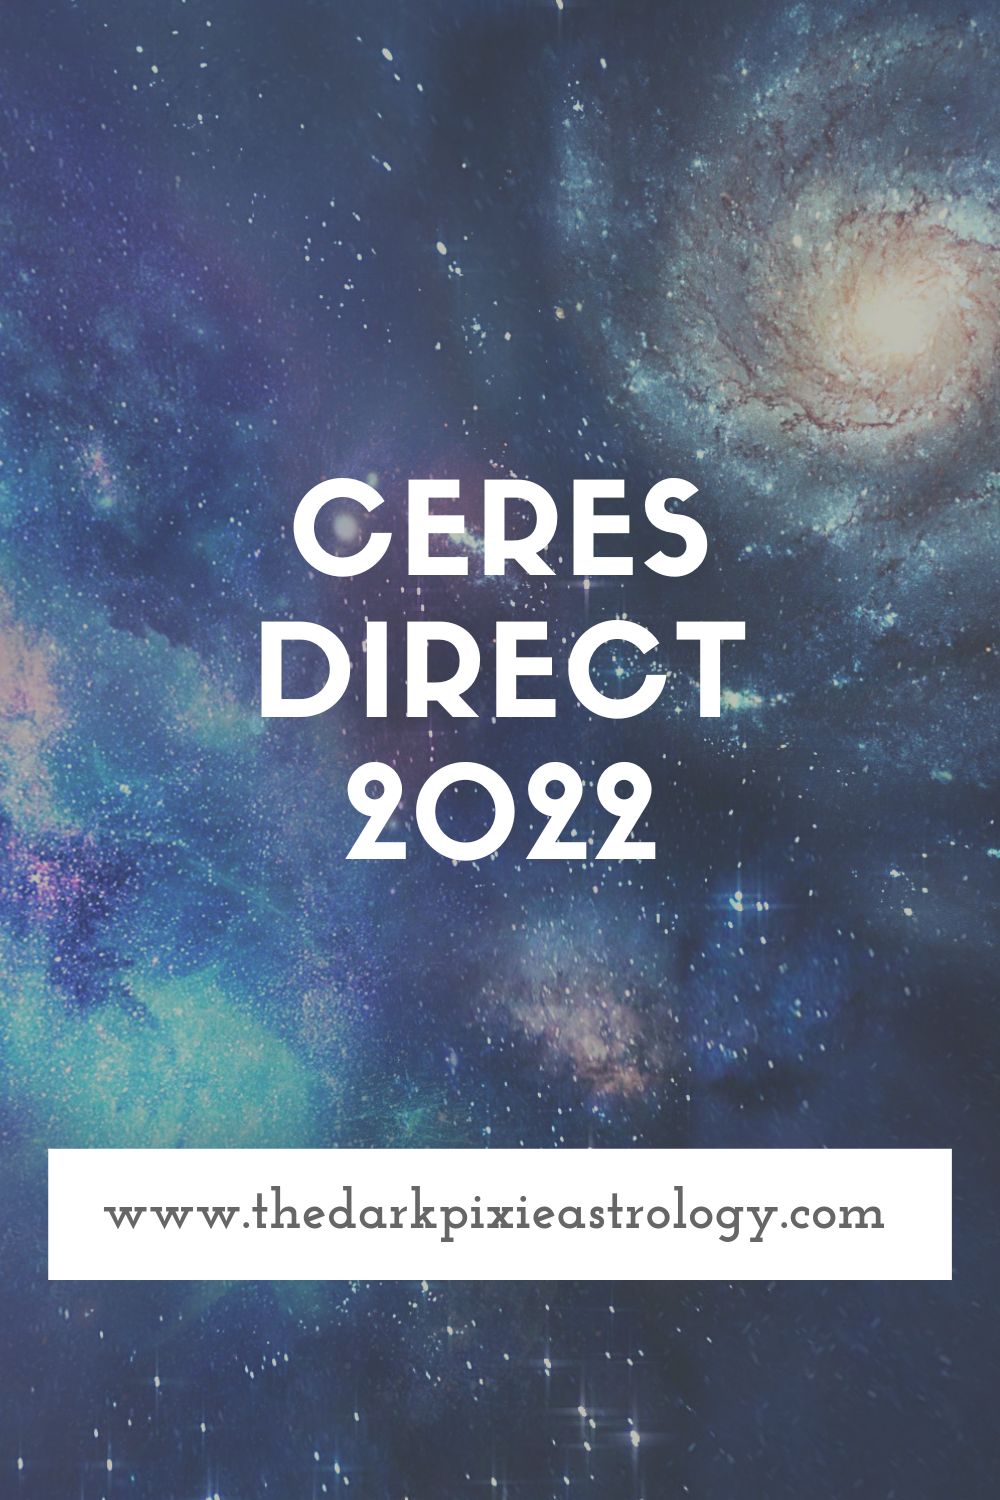 Ceres Direct 2022 - The Dark Pixie Astrology